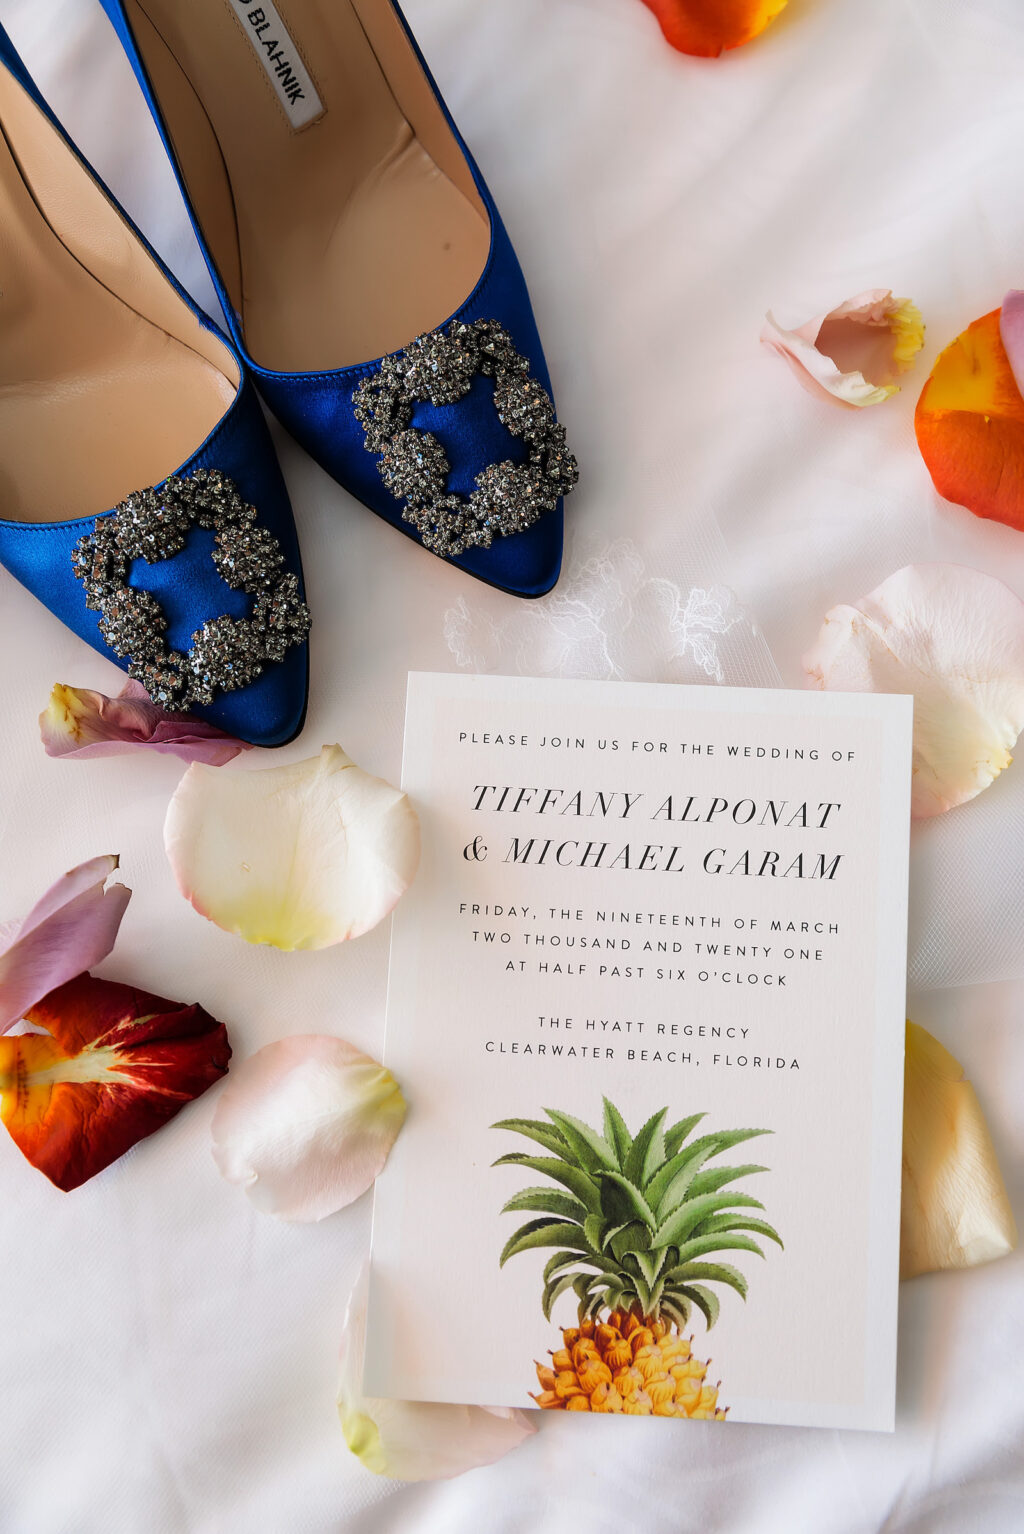 Tropical Pineapple Simple Wedding Invitation, Pointed Sapphire Blue and Black Rhinestone Brooch Manolo Blahnik Bridal Wedding Shoes | Tampa Bay Wedding Photographer Limelight Photography